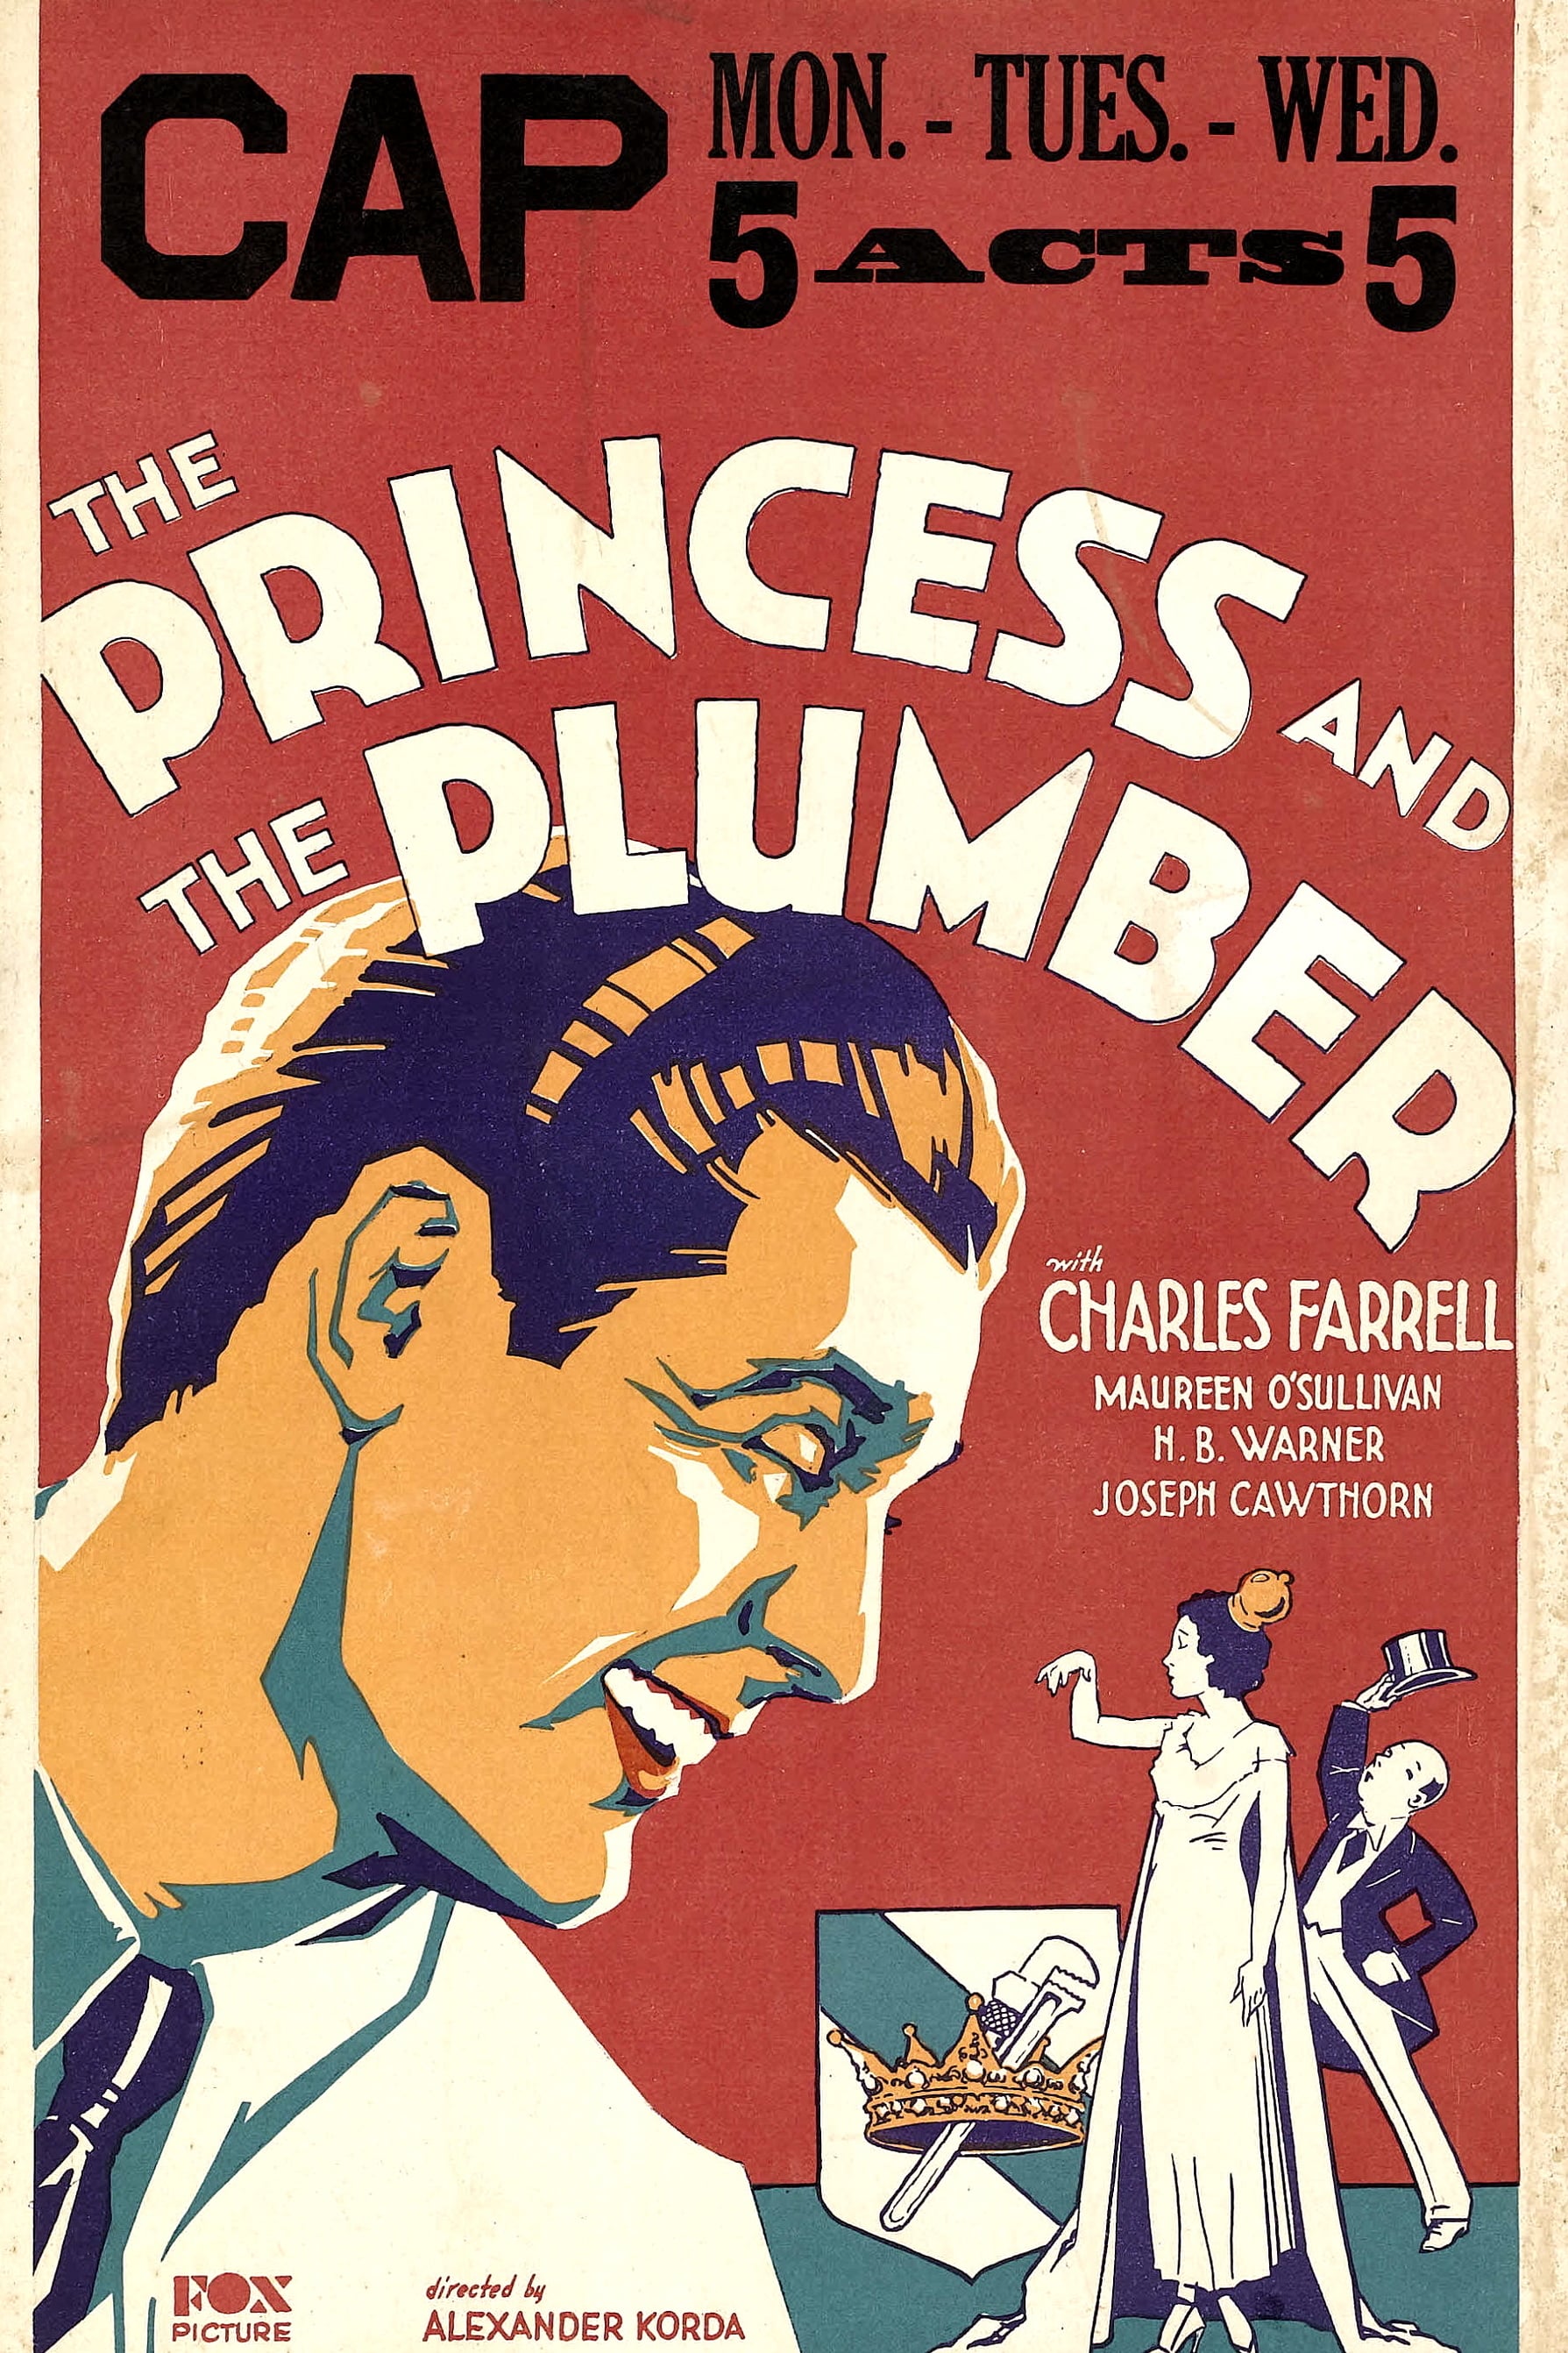 The Princess and the Plumber